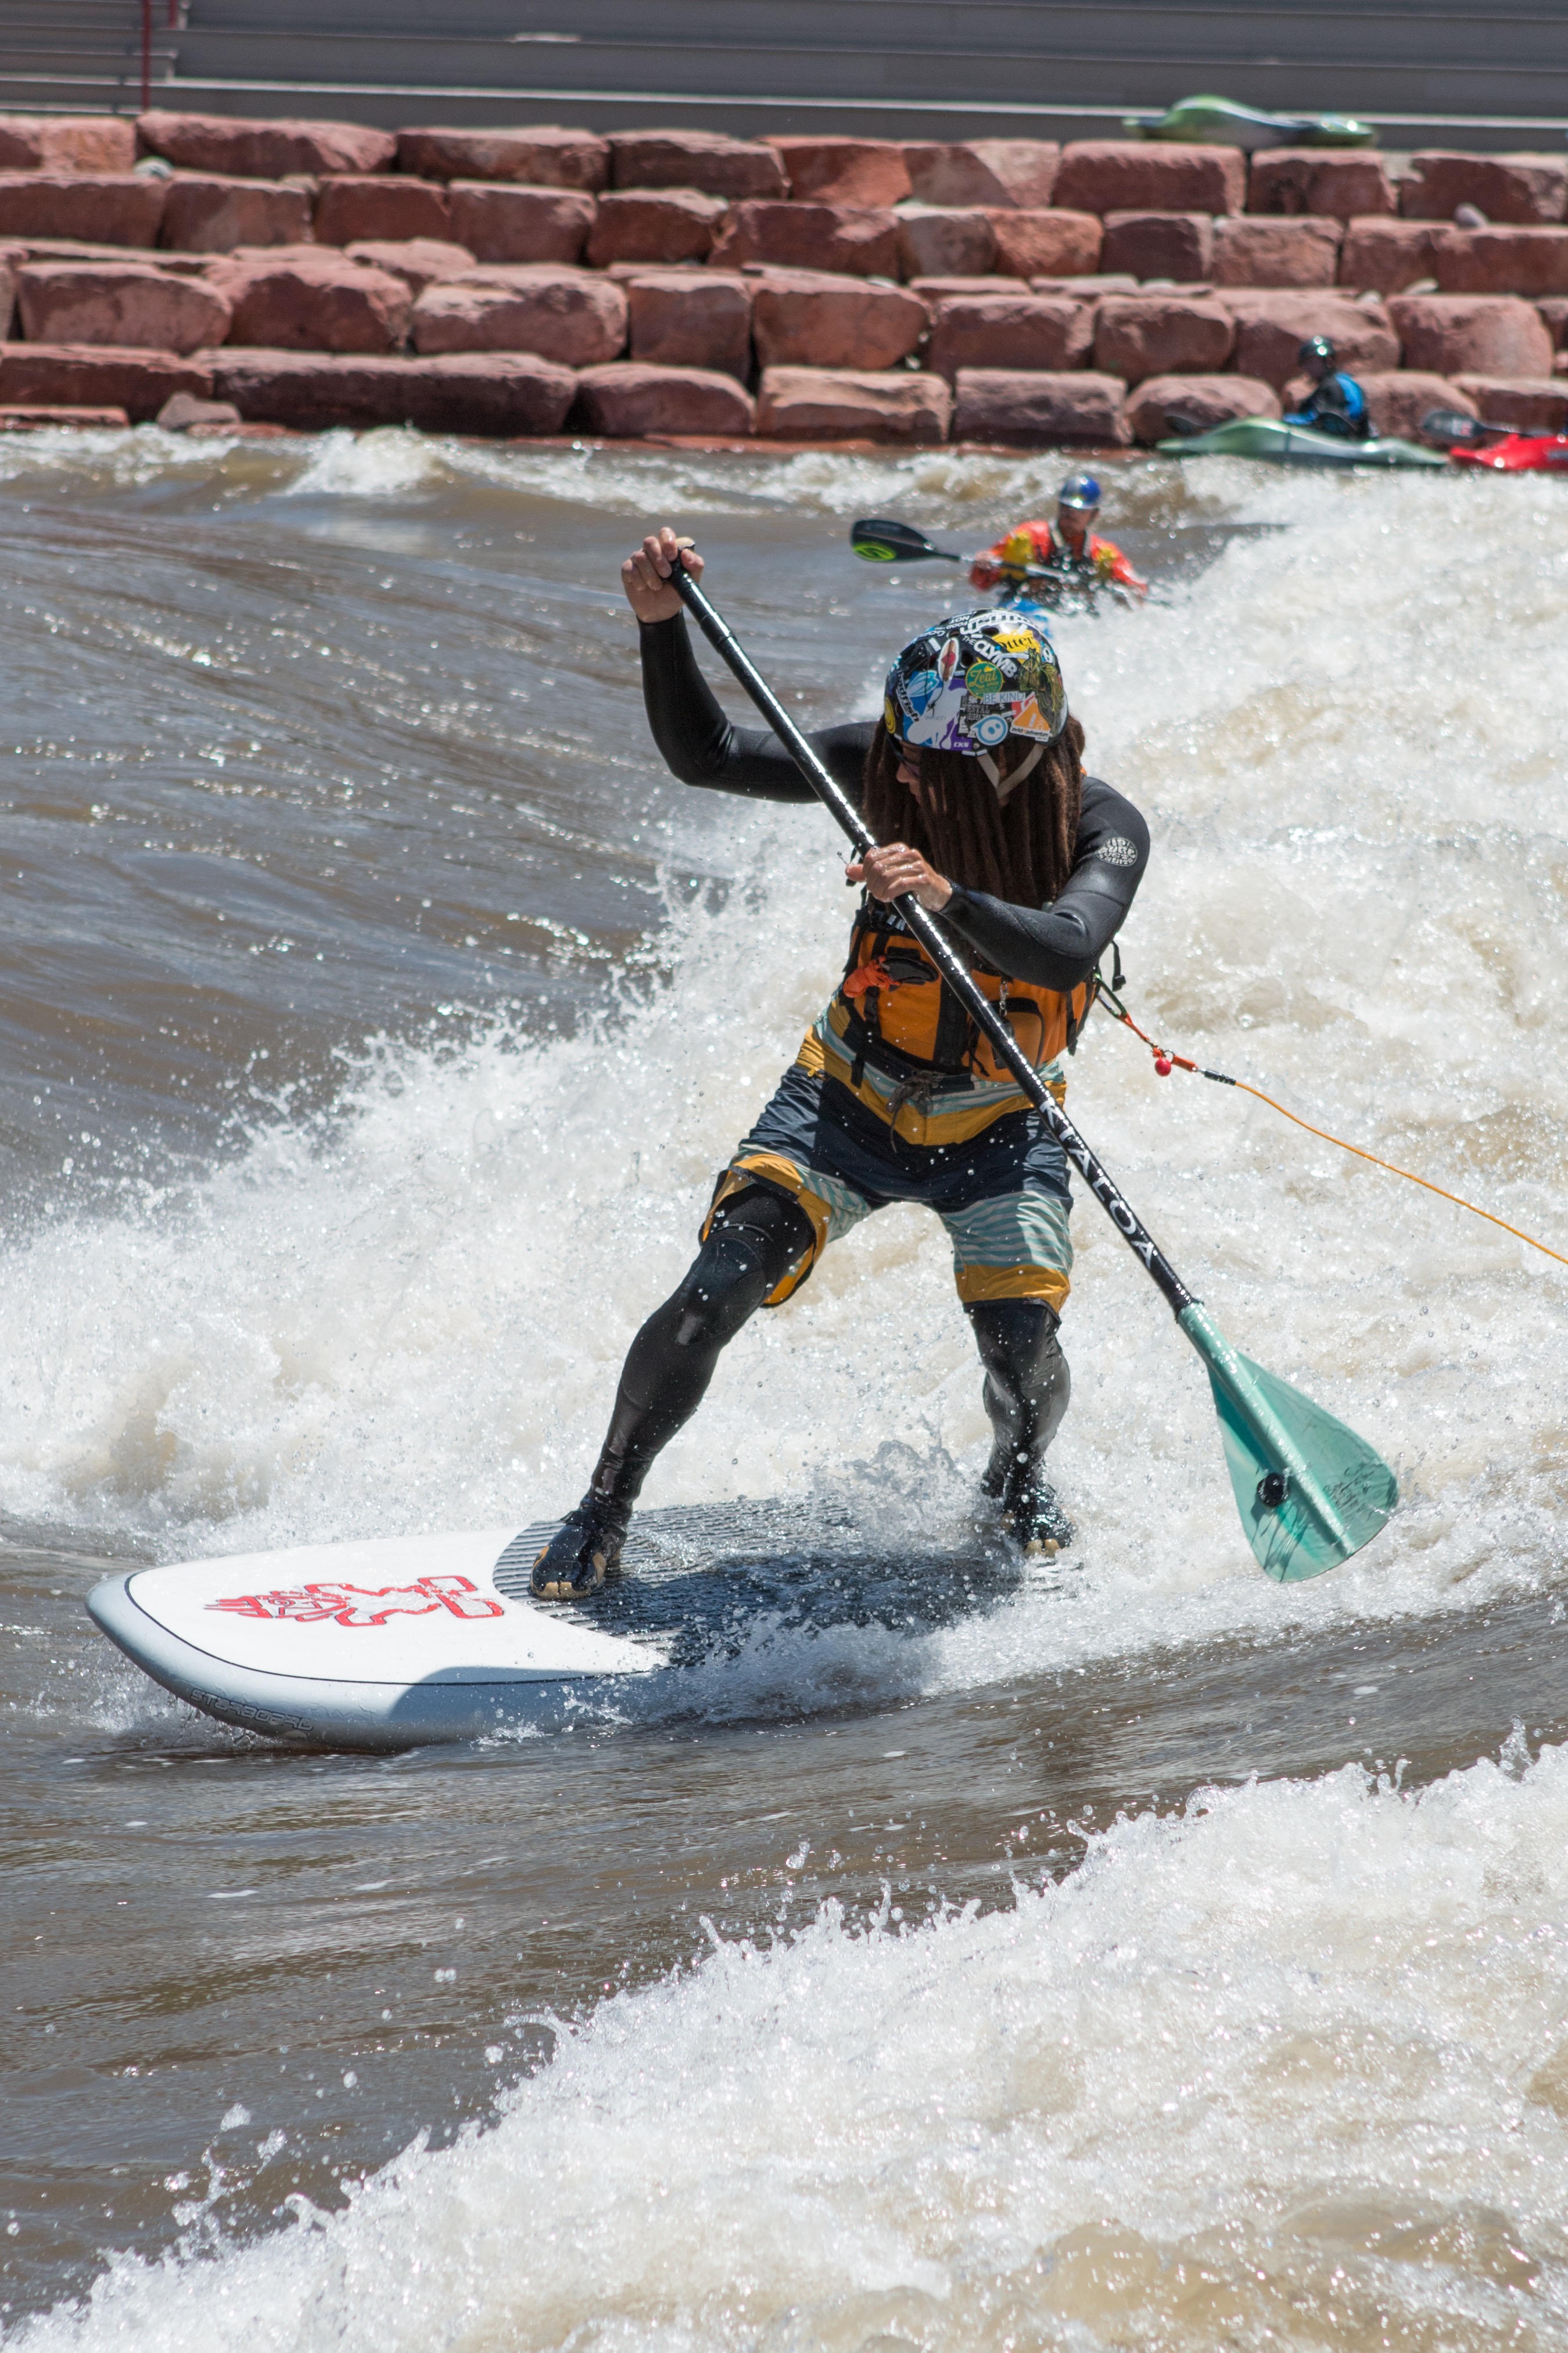 SUP river surfing Glenwood, Colorado on a Starboard Impossible